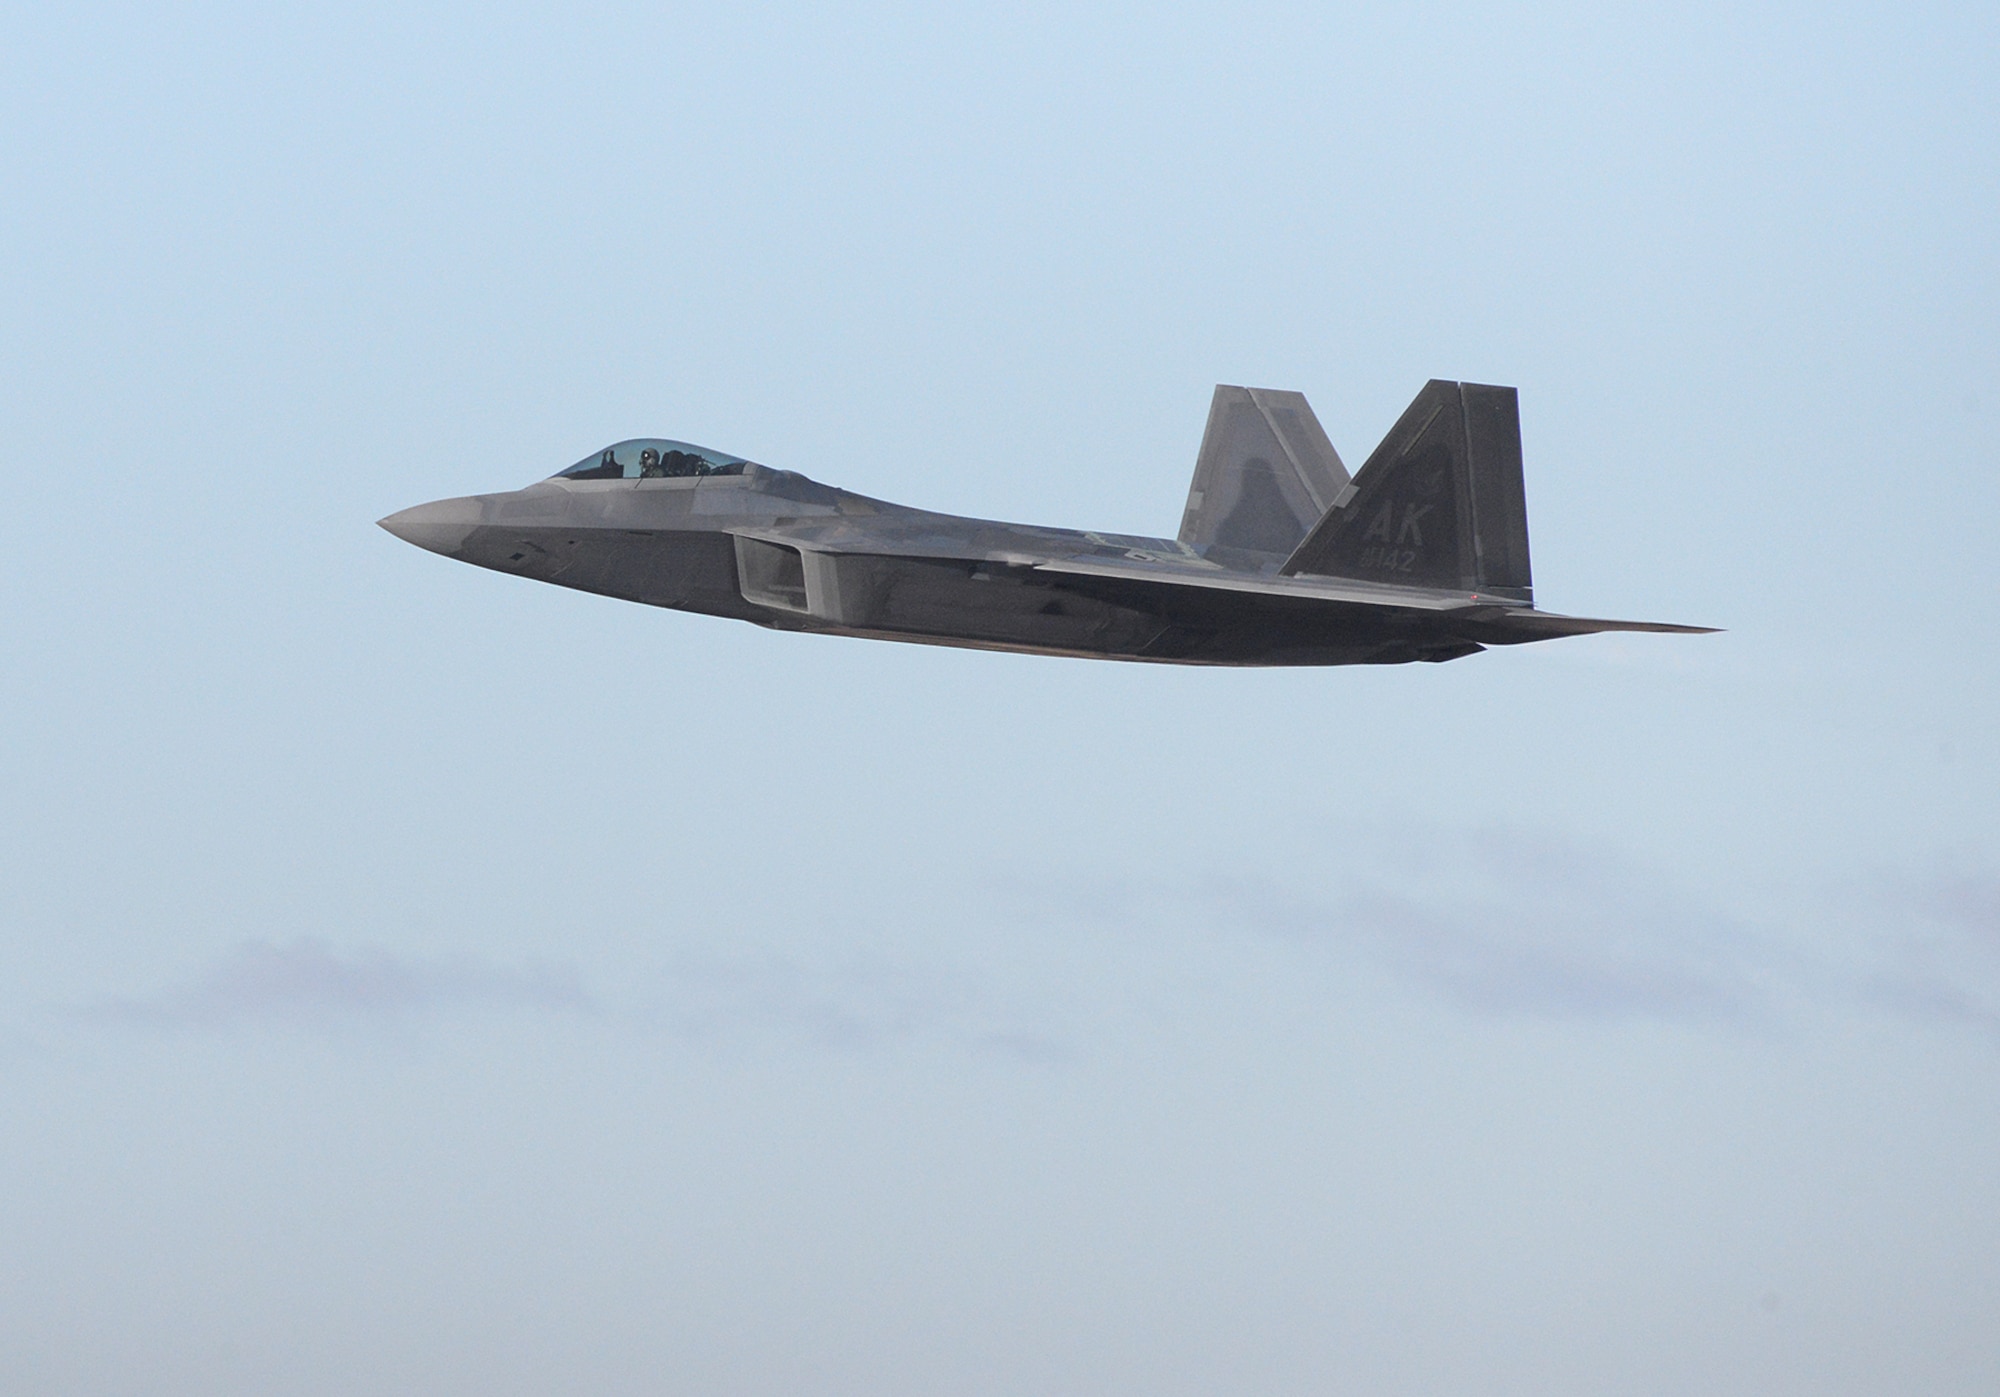 Maj. Philip “Stonewall” Johnson, 514th Flight Test Squadron F-22 test pilot, departs Hill Air Force Base, Utah, Nov. 24, 2020, on a functional check flight in the last F-22 Raptor to complete the F-22 Structural Repair Program. The 574th Aircraft Maintenance Squadron processed 247 F-22s through the program by performing structural modifications to increase total flying hour serviceability on each aircraft by 8,000 hours. (U.S. Air Force photo by Alex R. Lloyd)